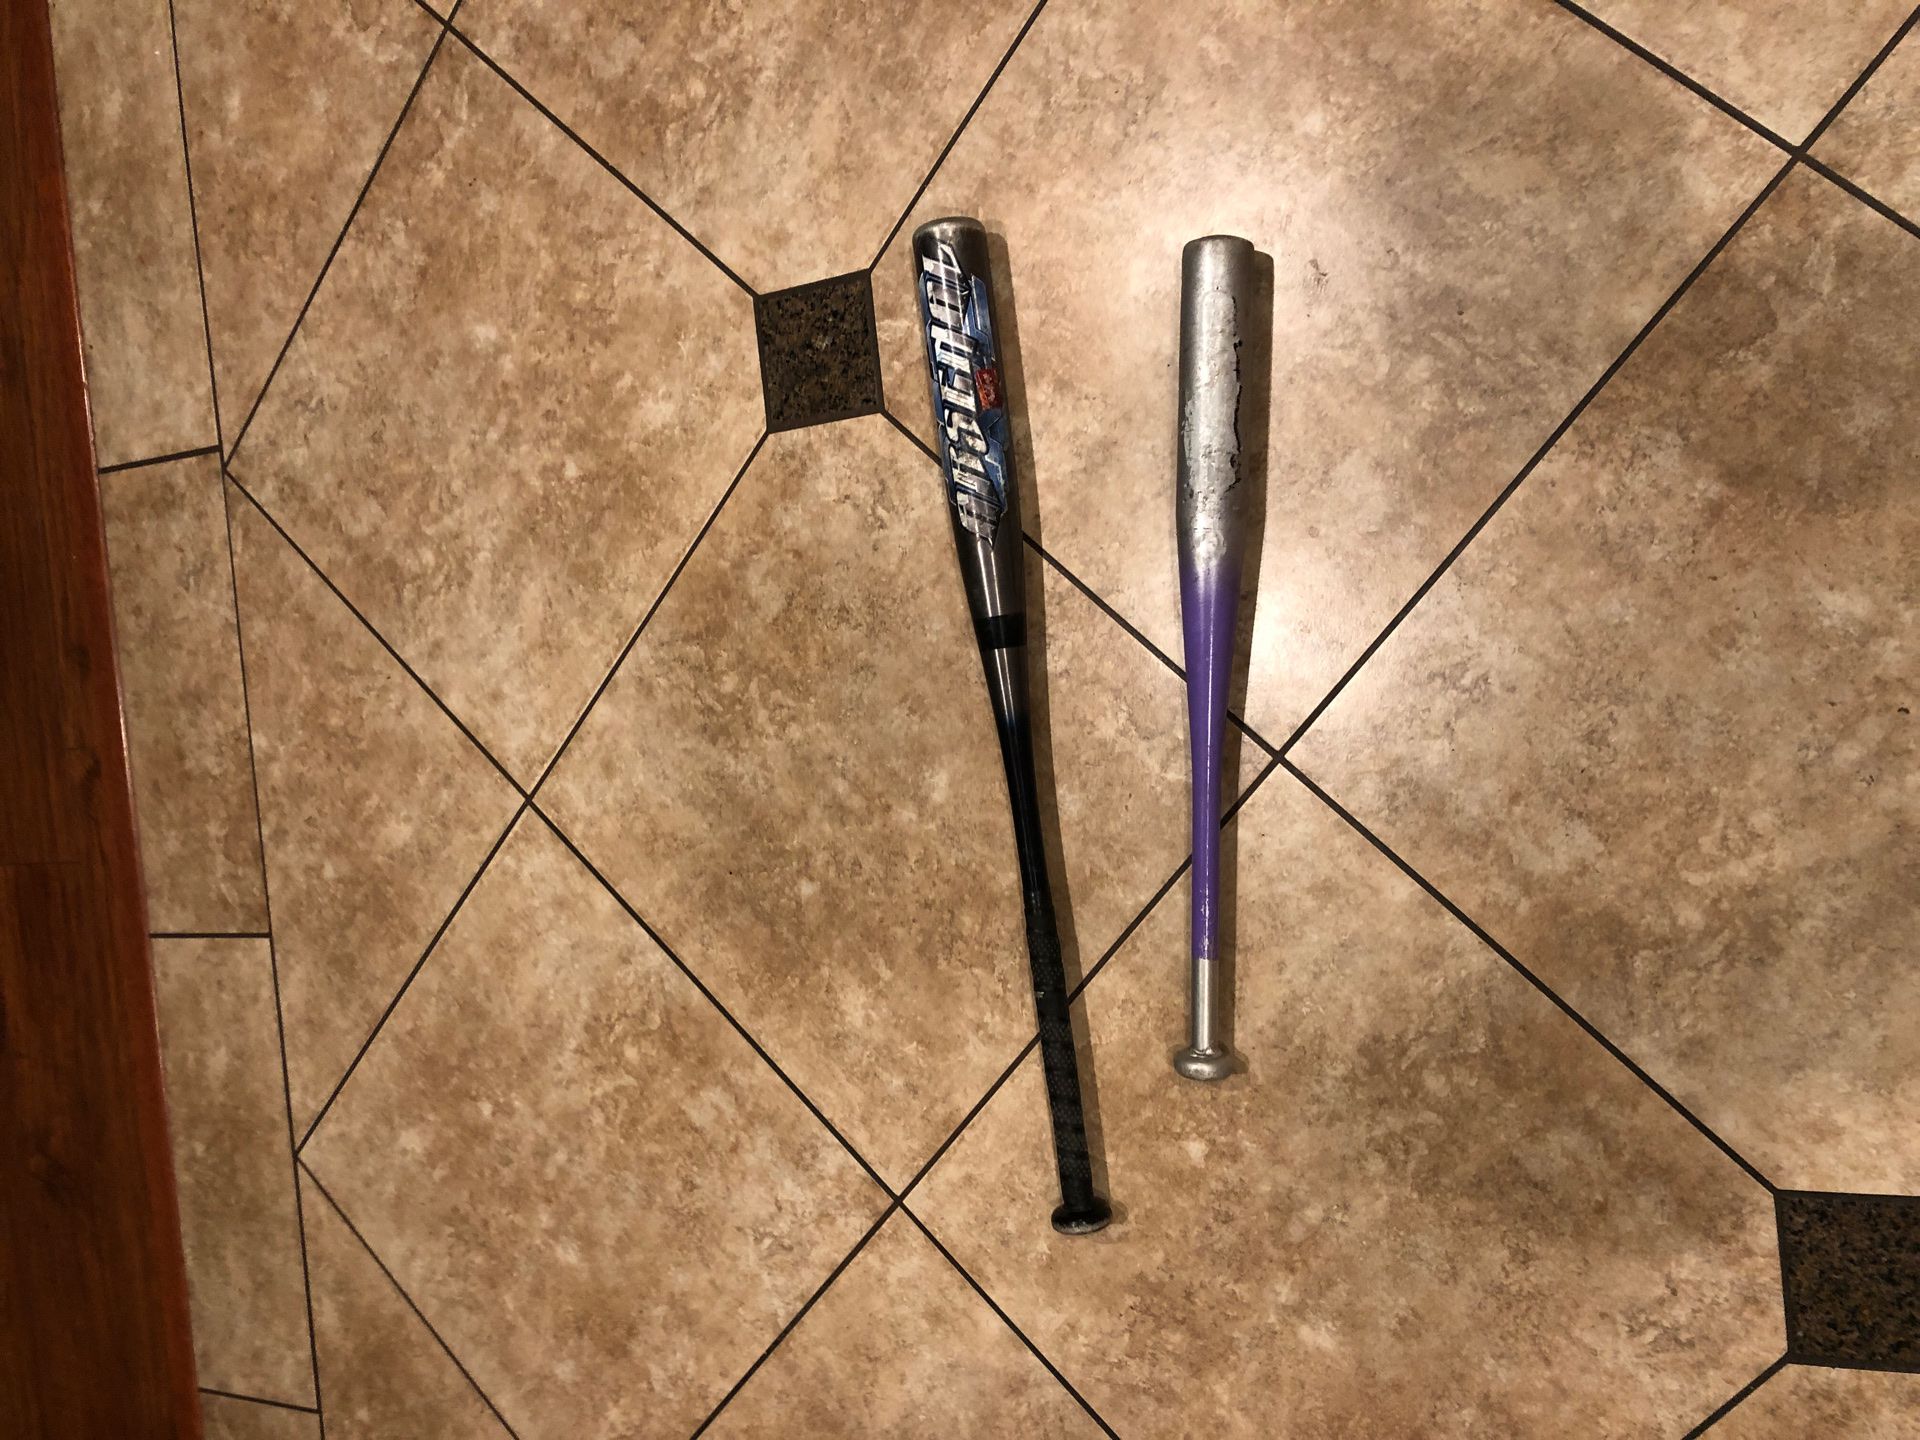 2 baseball bats different prices or both for $10